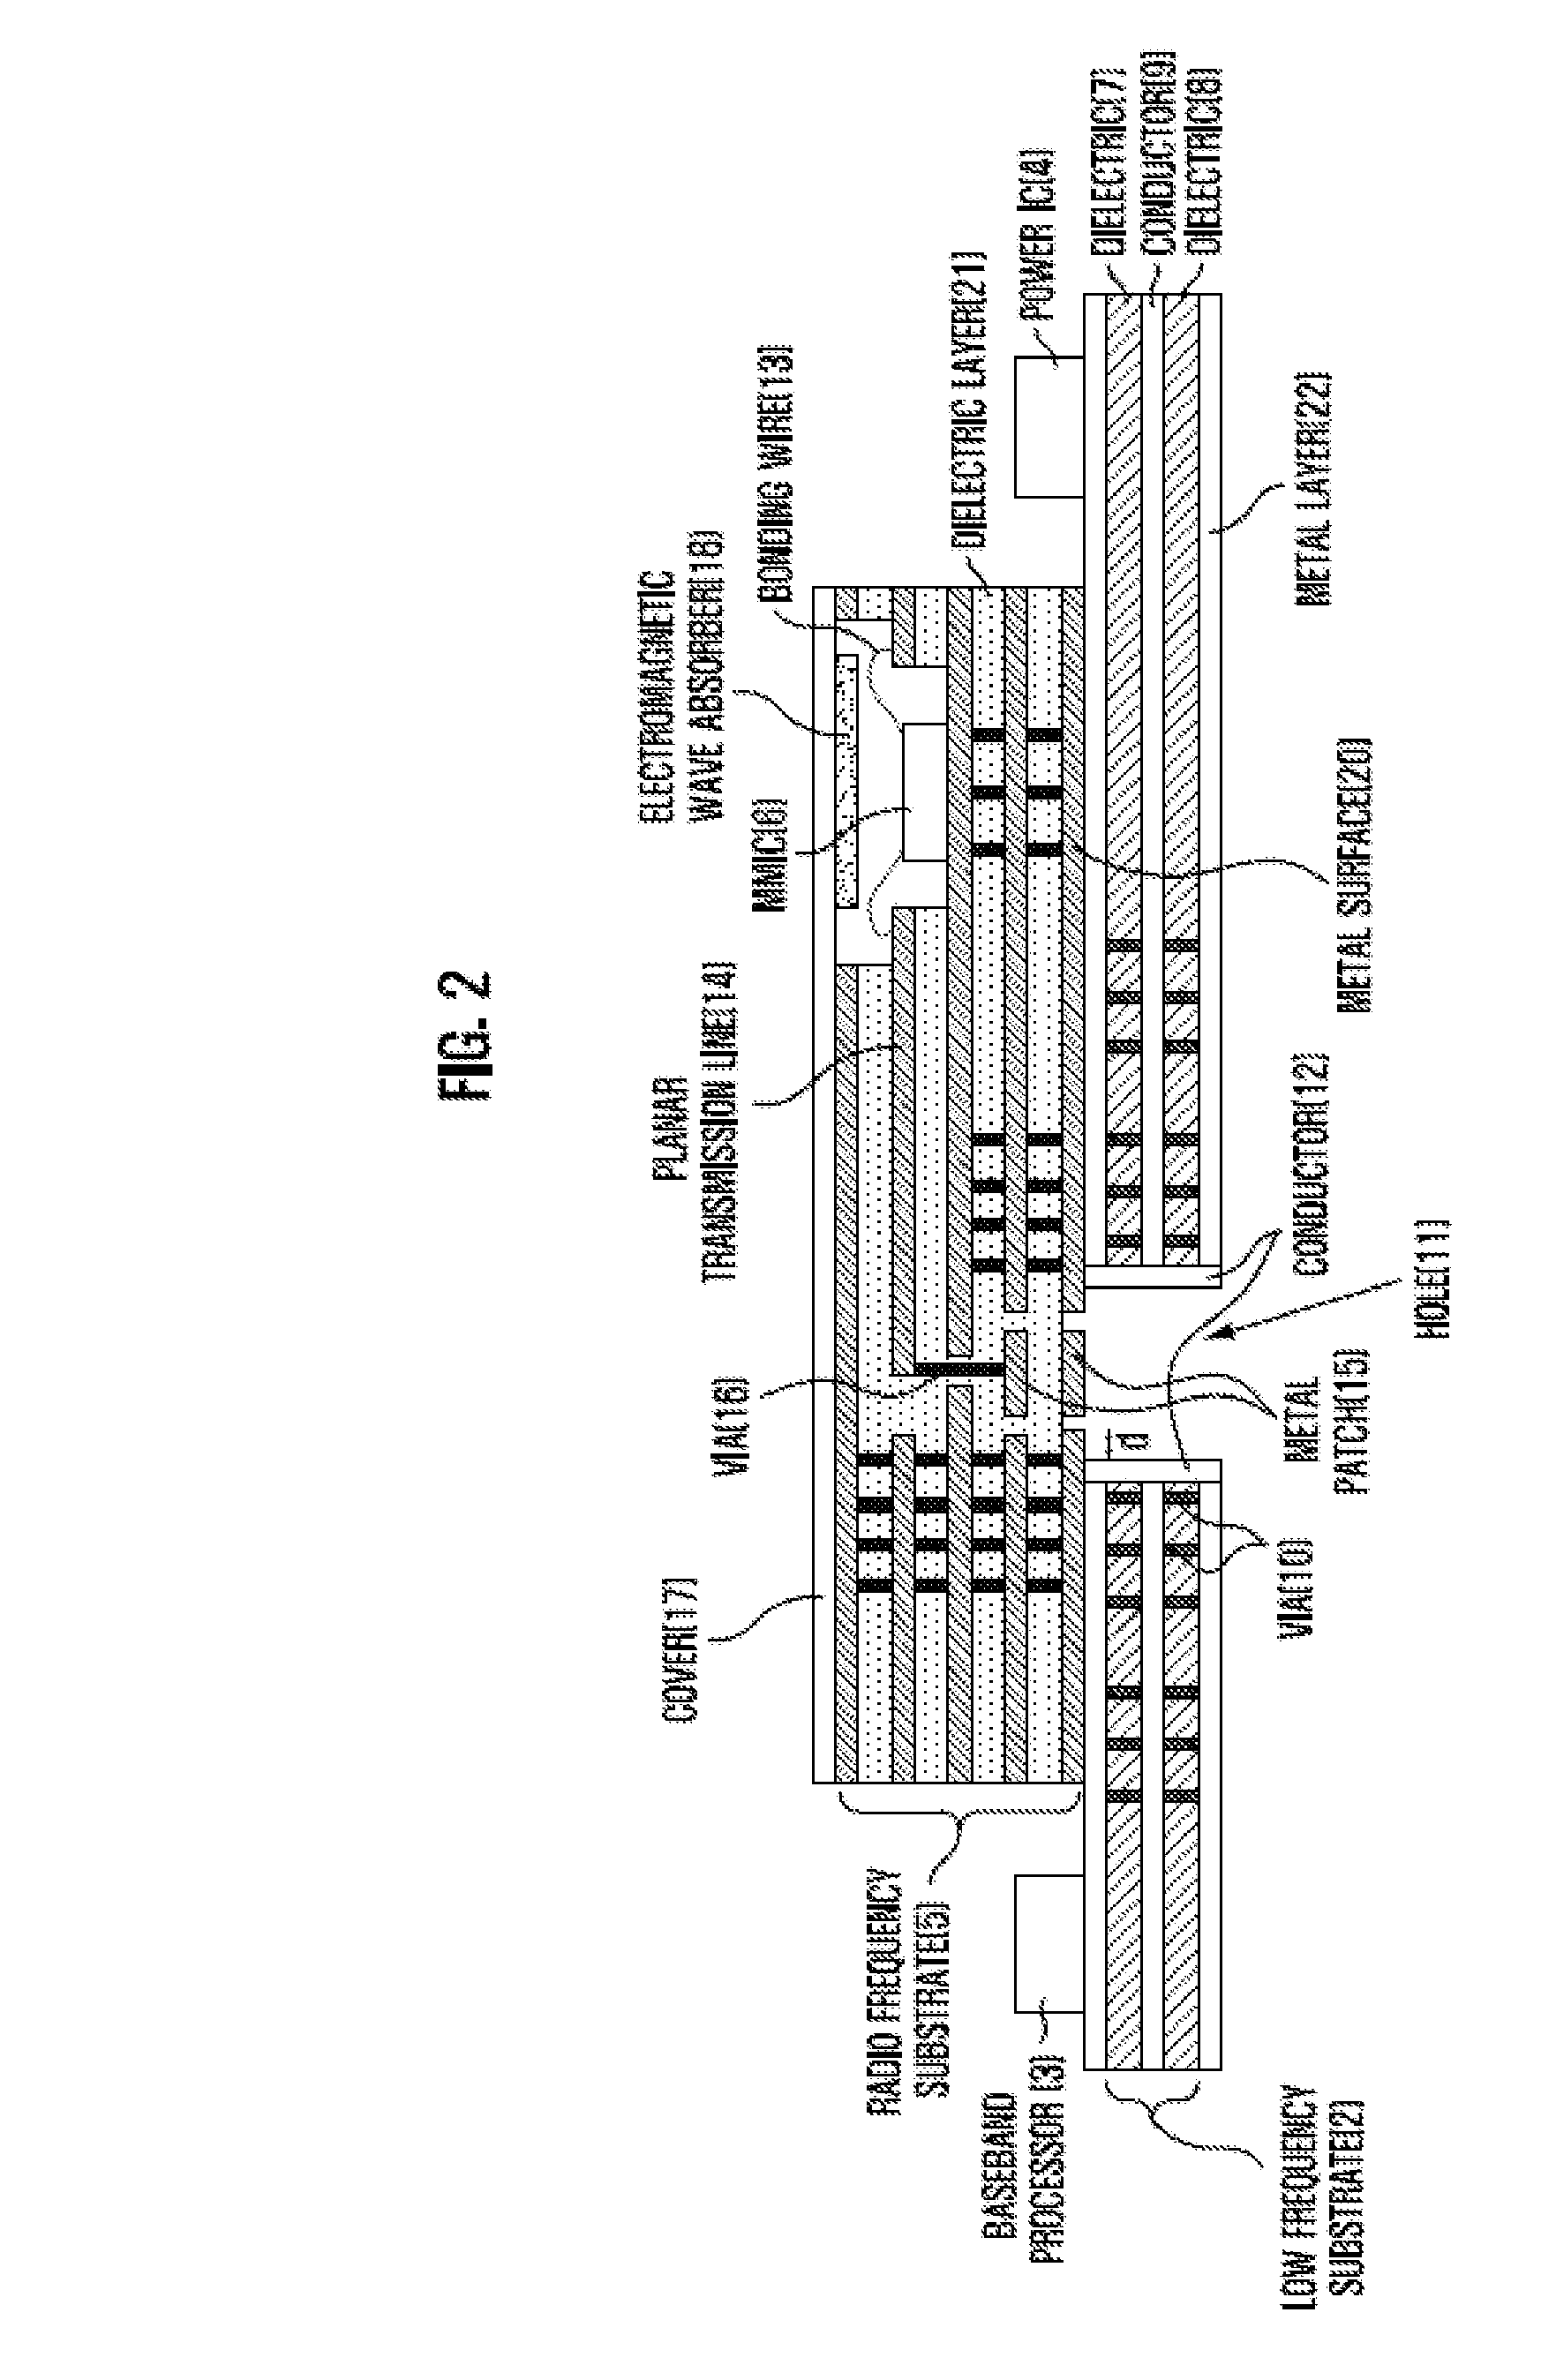 Mode transition between a planar line and a waveguide with a low loss RF substrate and a high loss low frequency substrate